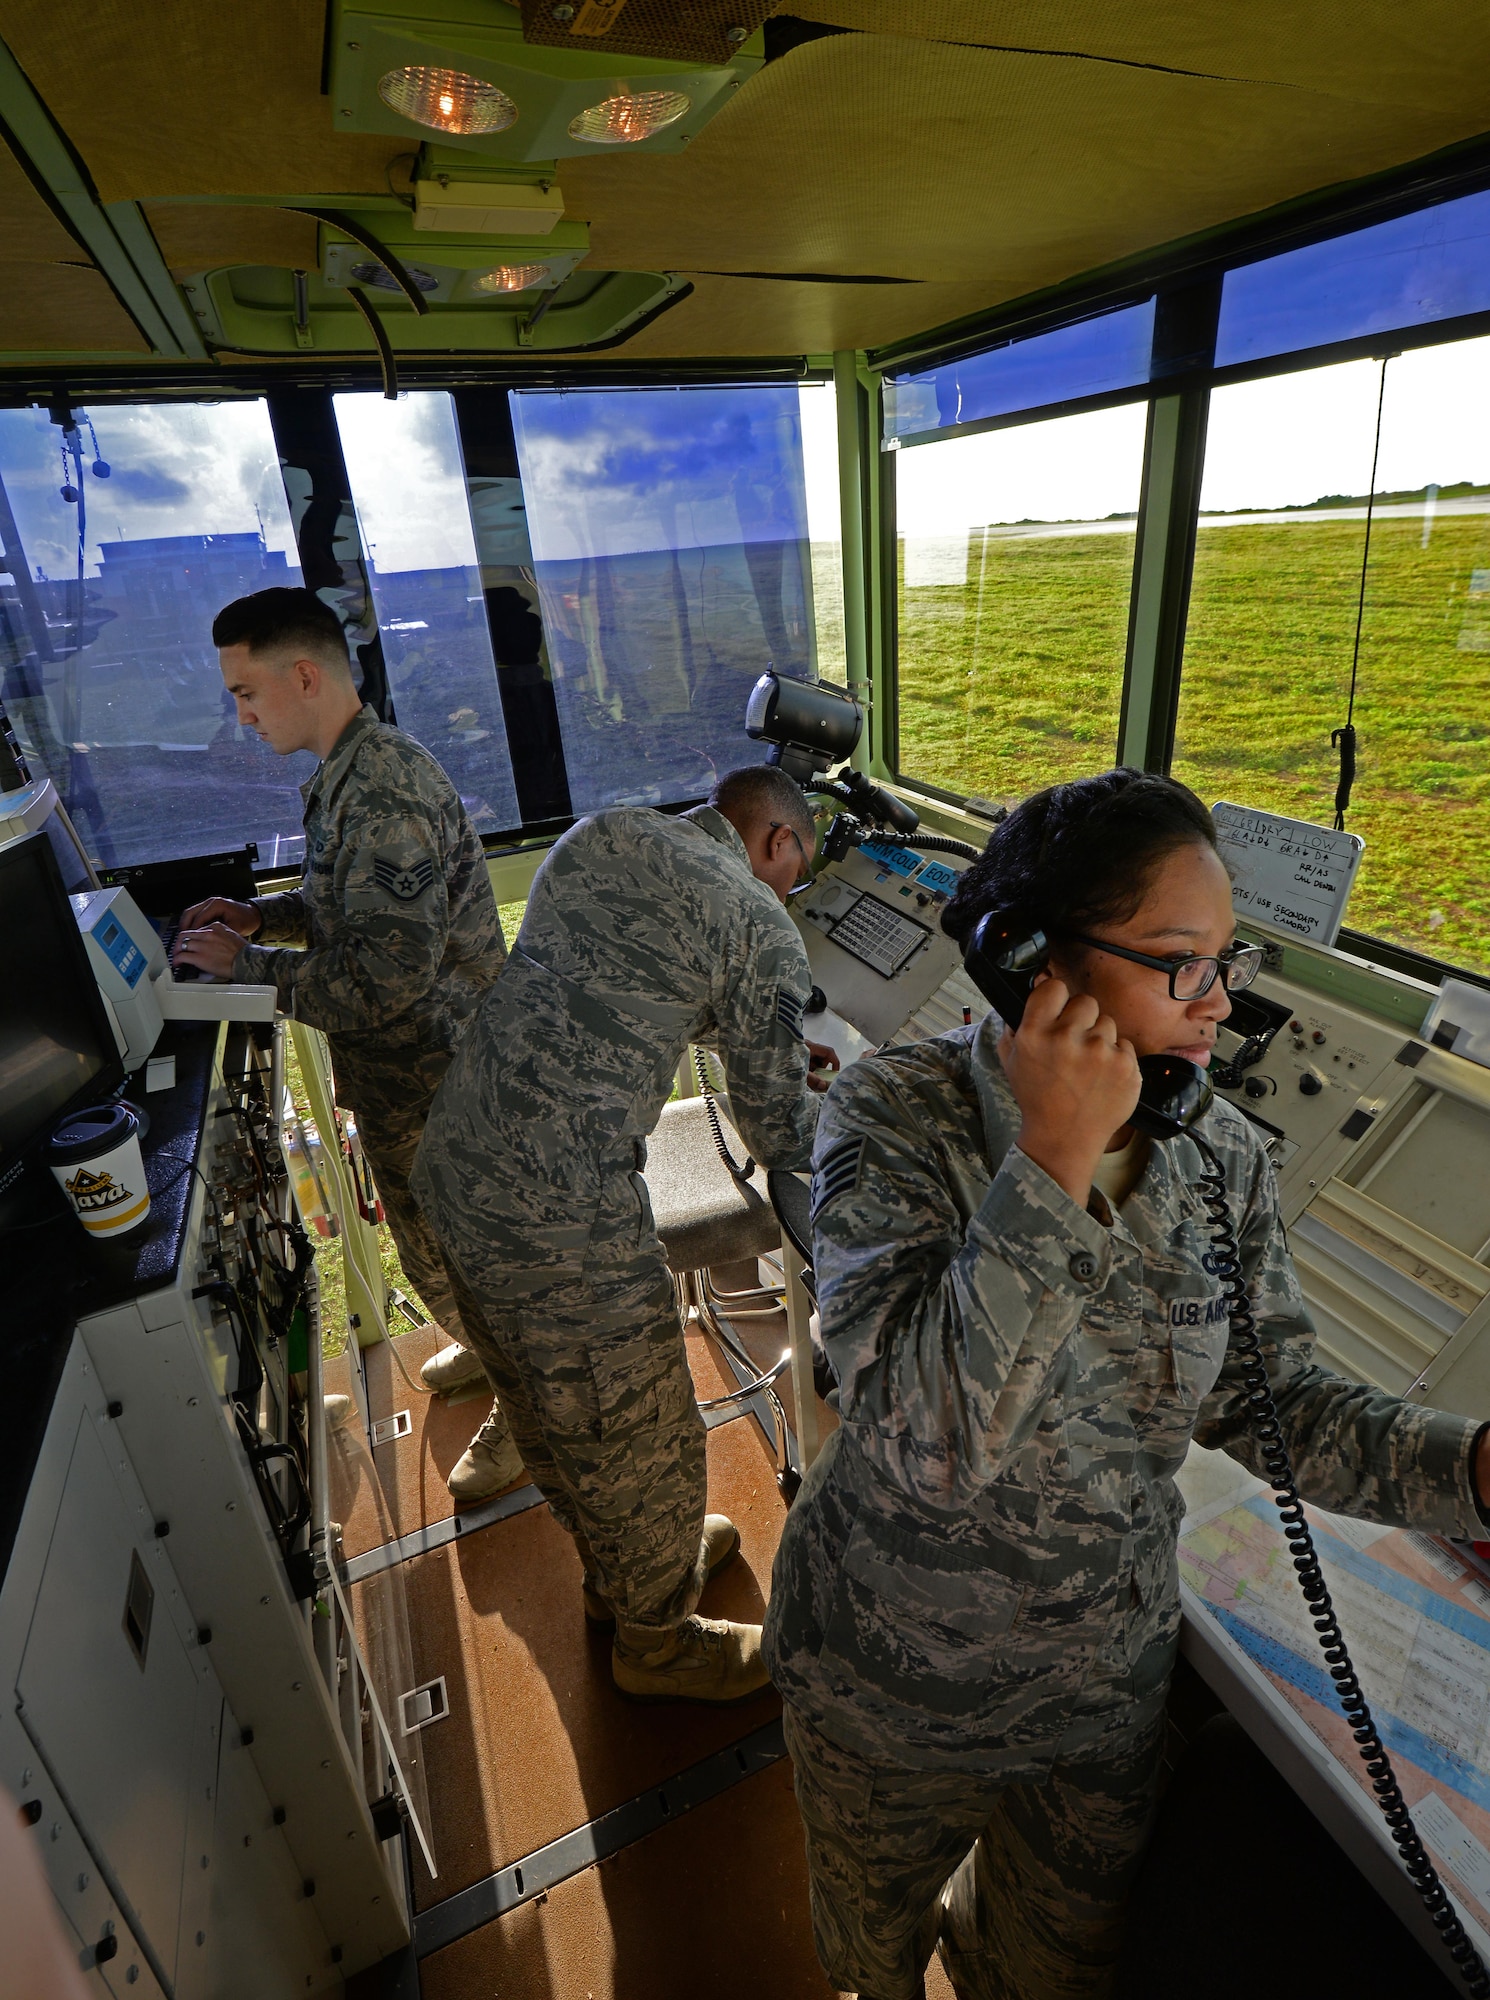 U.S. Air Force Airmen assigned to the 36th Operation Support Squadron work in the MSN-7 mobile tower unit parked on the flightline June 22, 2017, at Andersen Air Force Base, Guam. Air traffic control Airmen assigned to the 36th Operation Support Squadron began work in the new tower cab here June 30 after spending almost three months working in the mobile tower unit on the flightline. (U.S. Air Force photo by Senior Airman Alexa Ann Henderson)